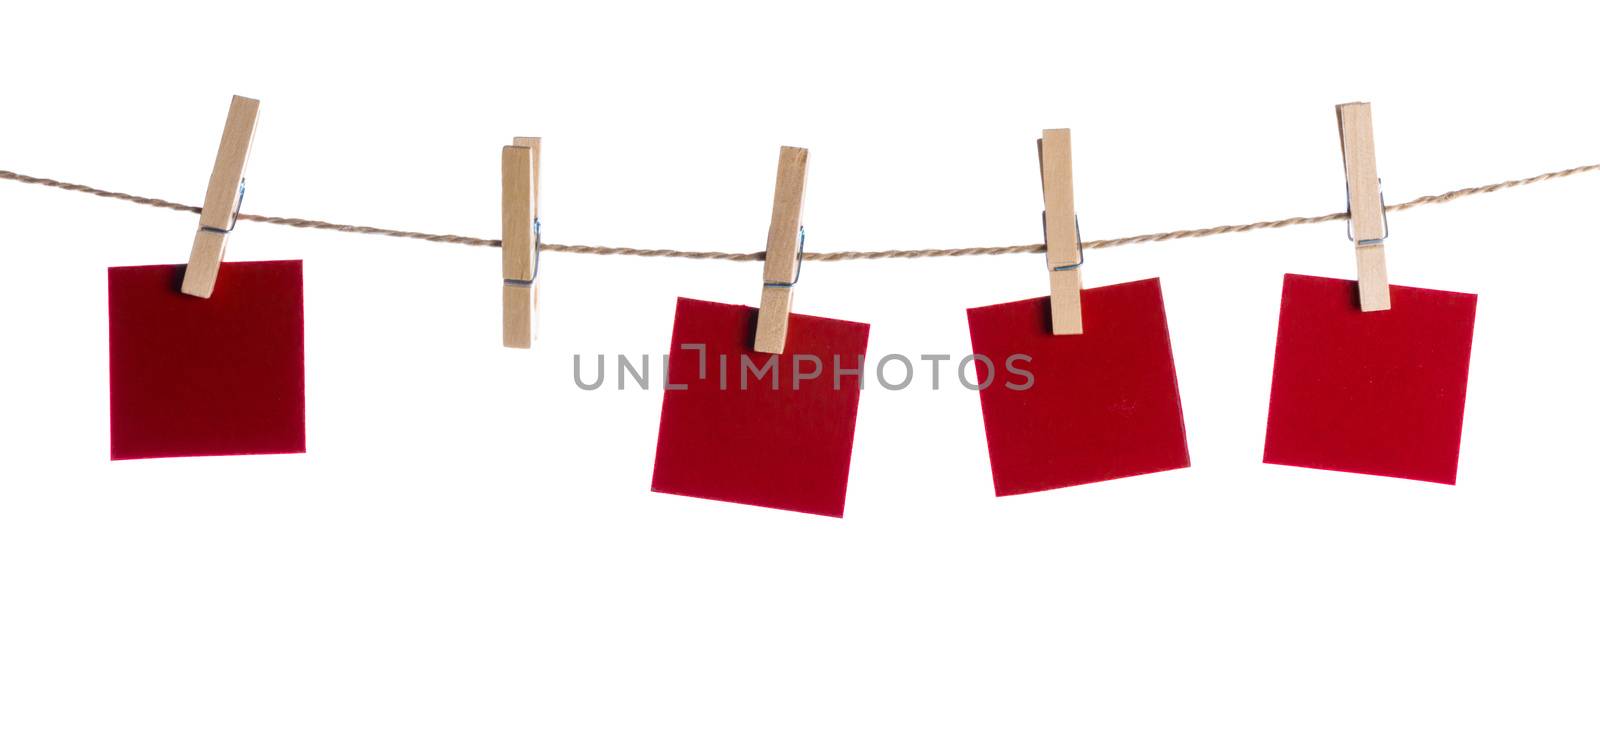 Set of four red blank paper notes held on a string with clothespins isolated on white background